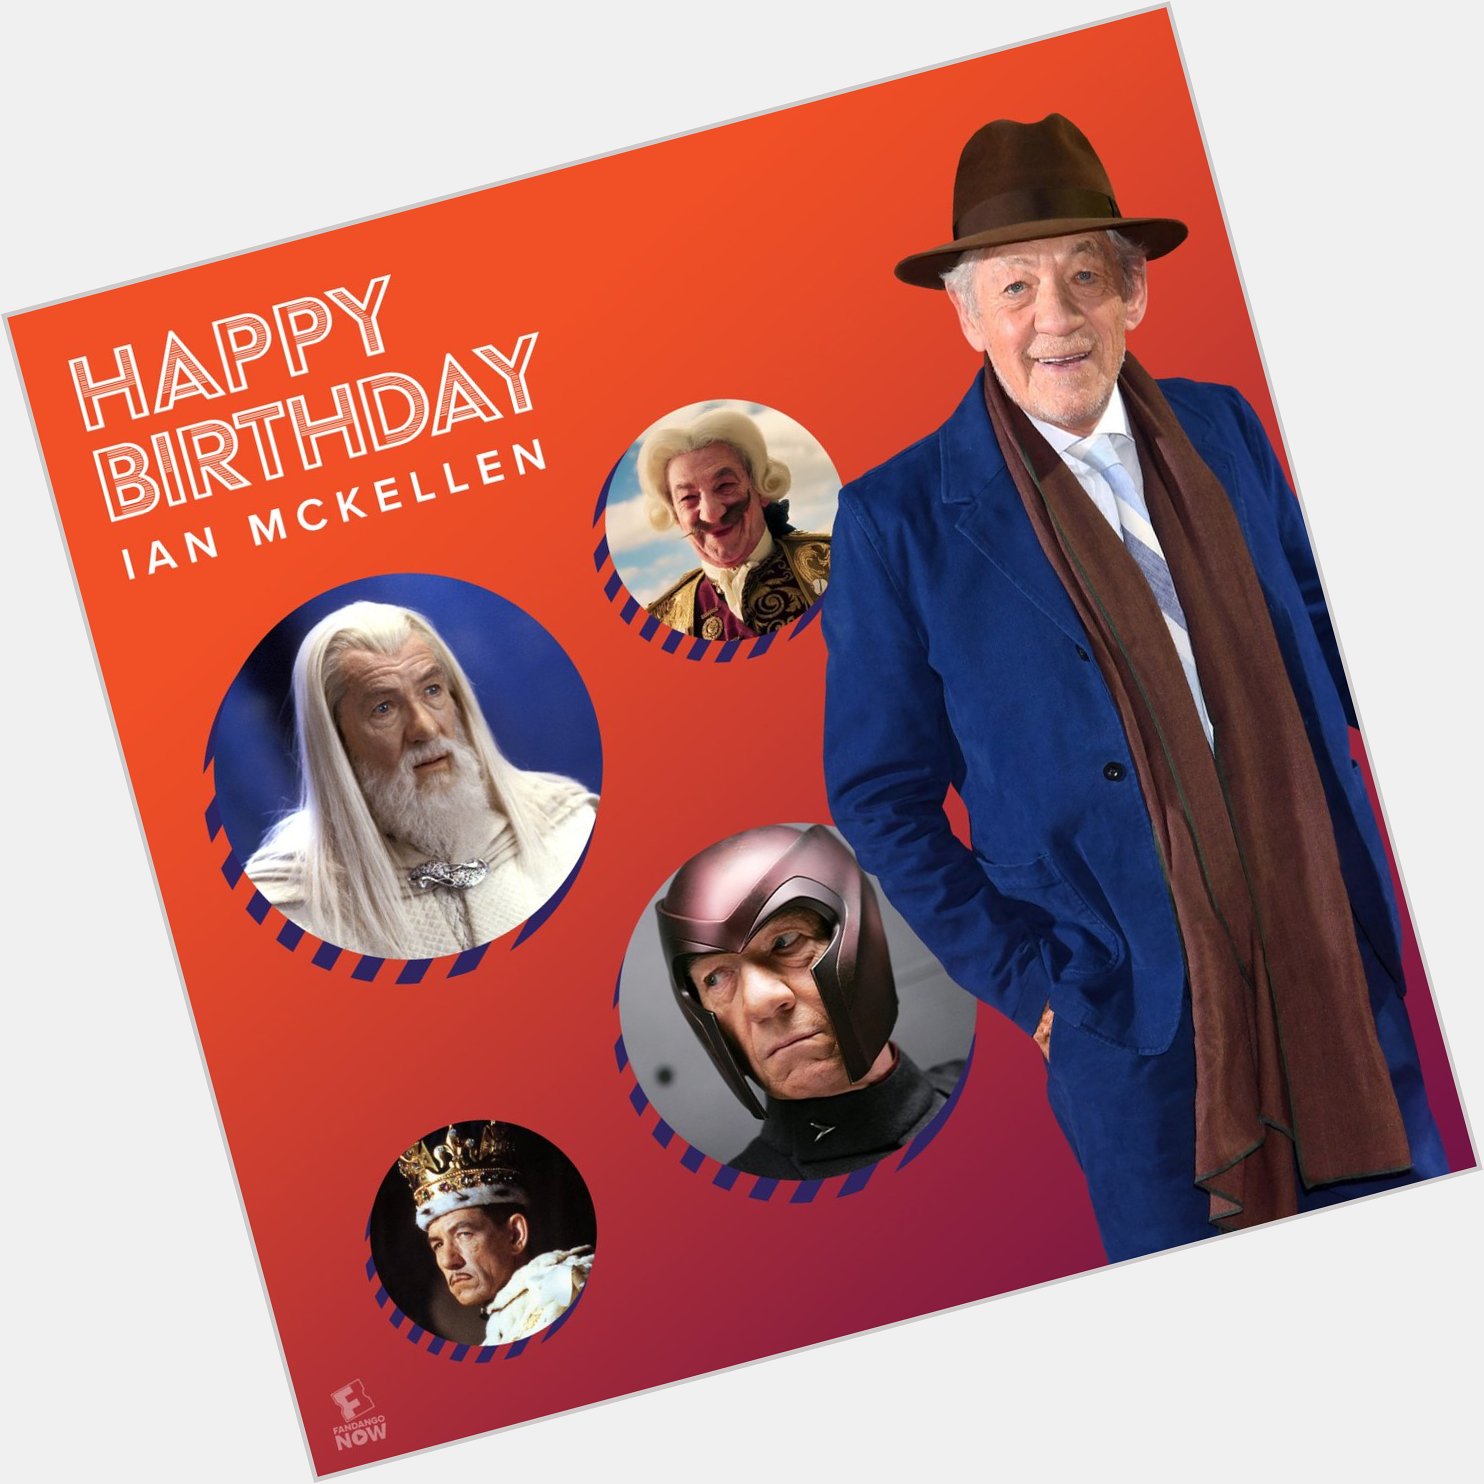 You shall not pass this post without wishing Ian McKellen a happy birthday! 